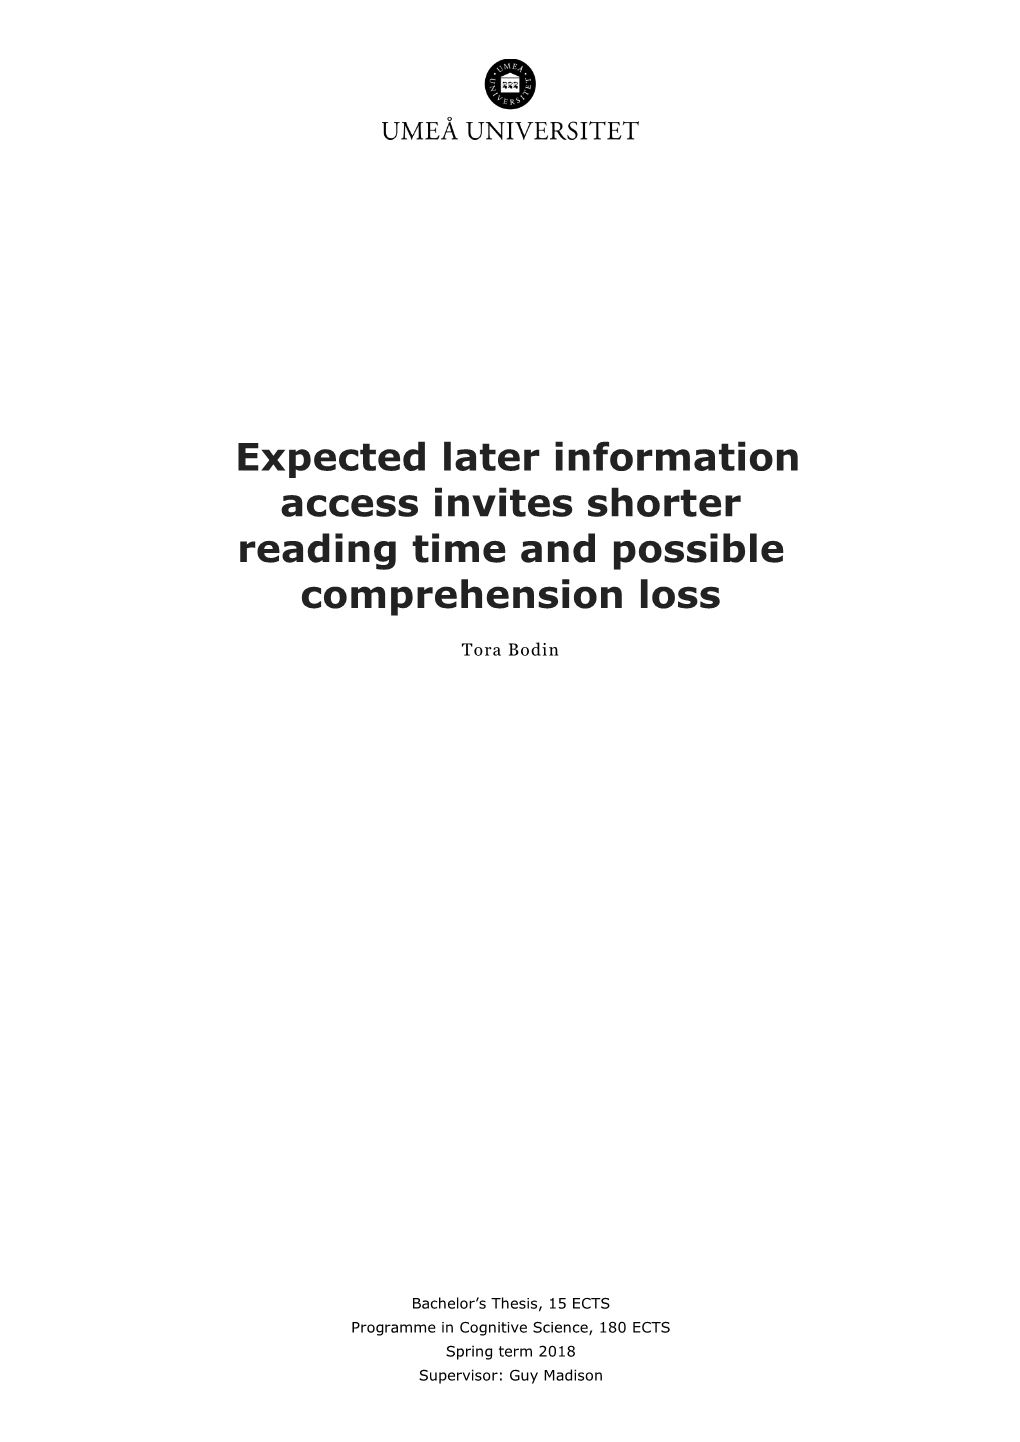 Expected Later Information Access Invites Shorter Reading Time and Possible Comprehension Loss